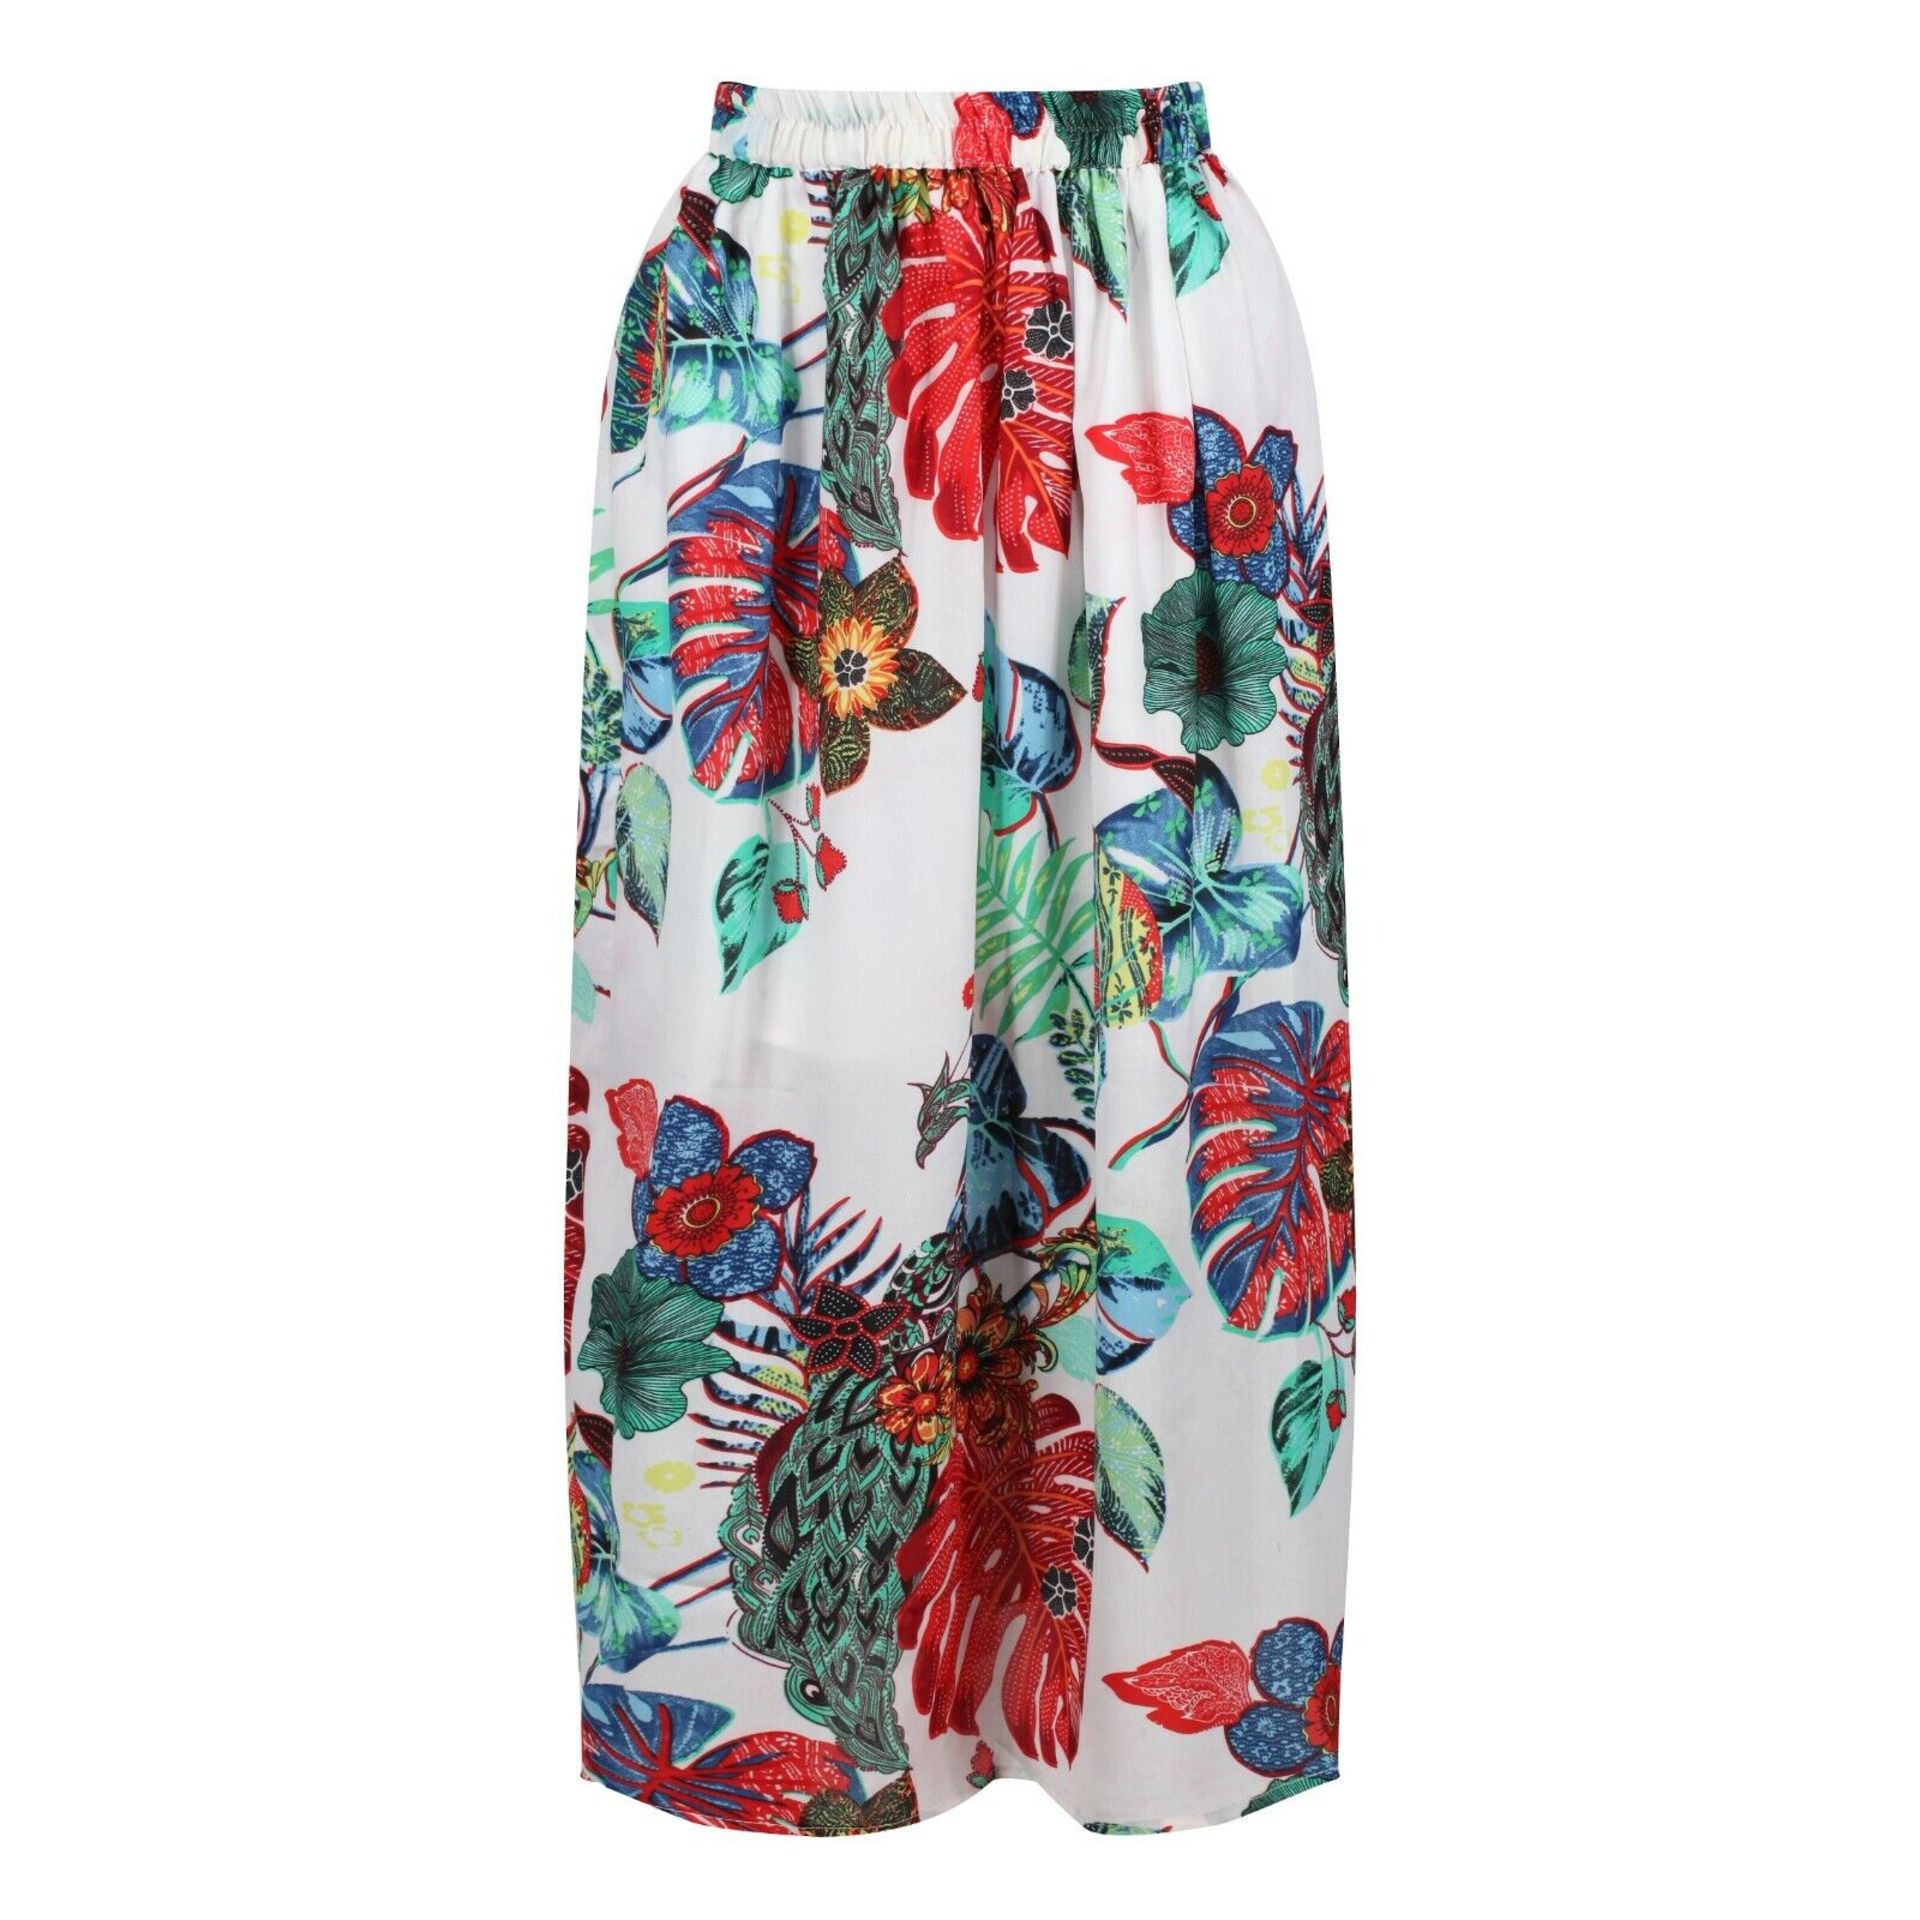 30 x New Women's Skirts Trousers Clothing Fashion - Image 5 of 8